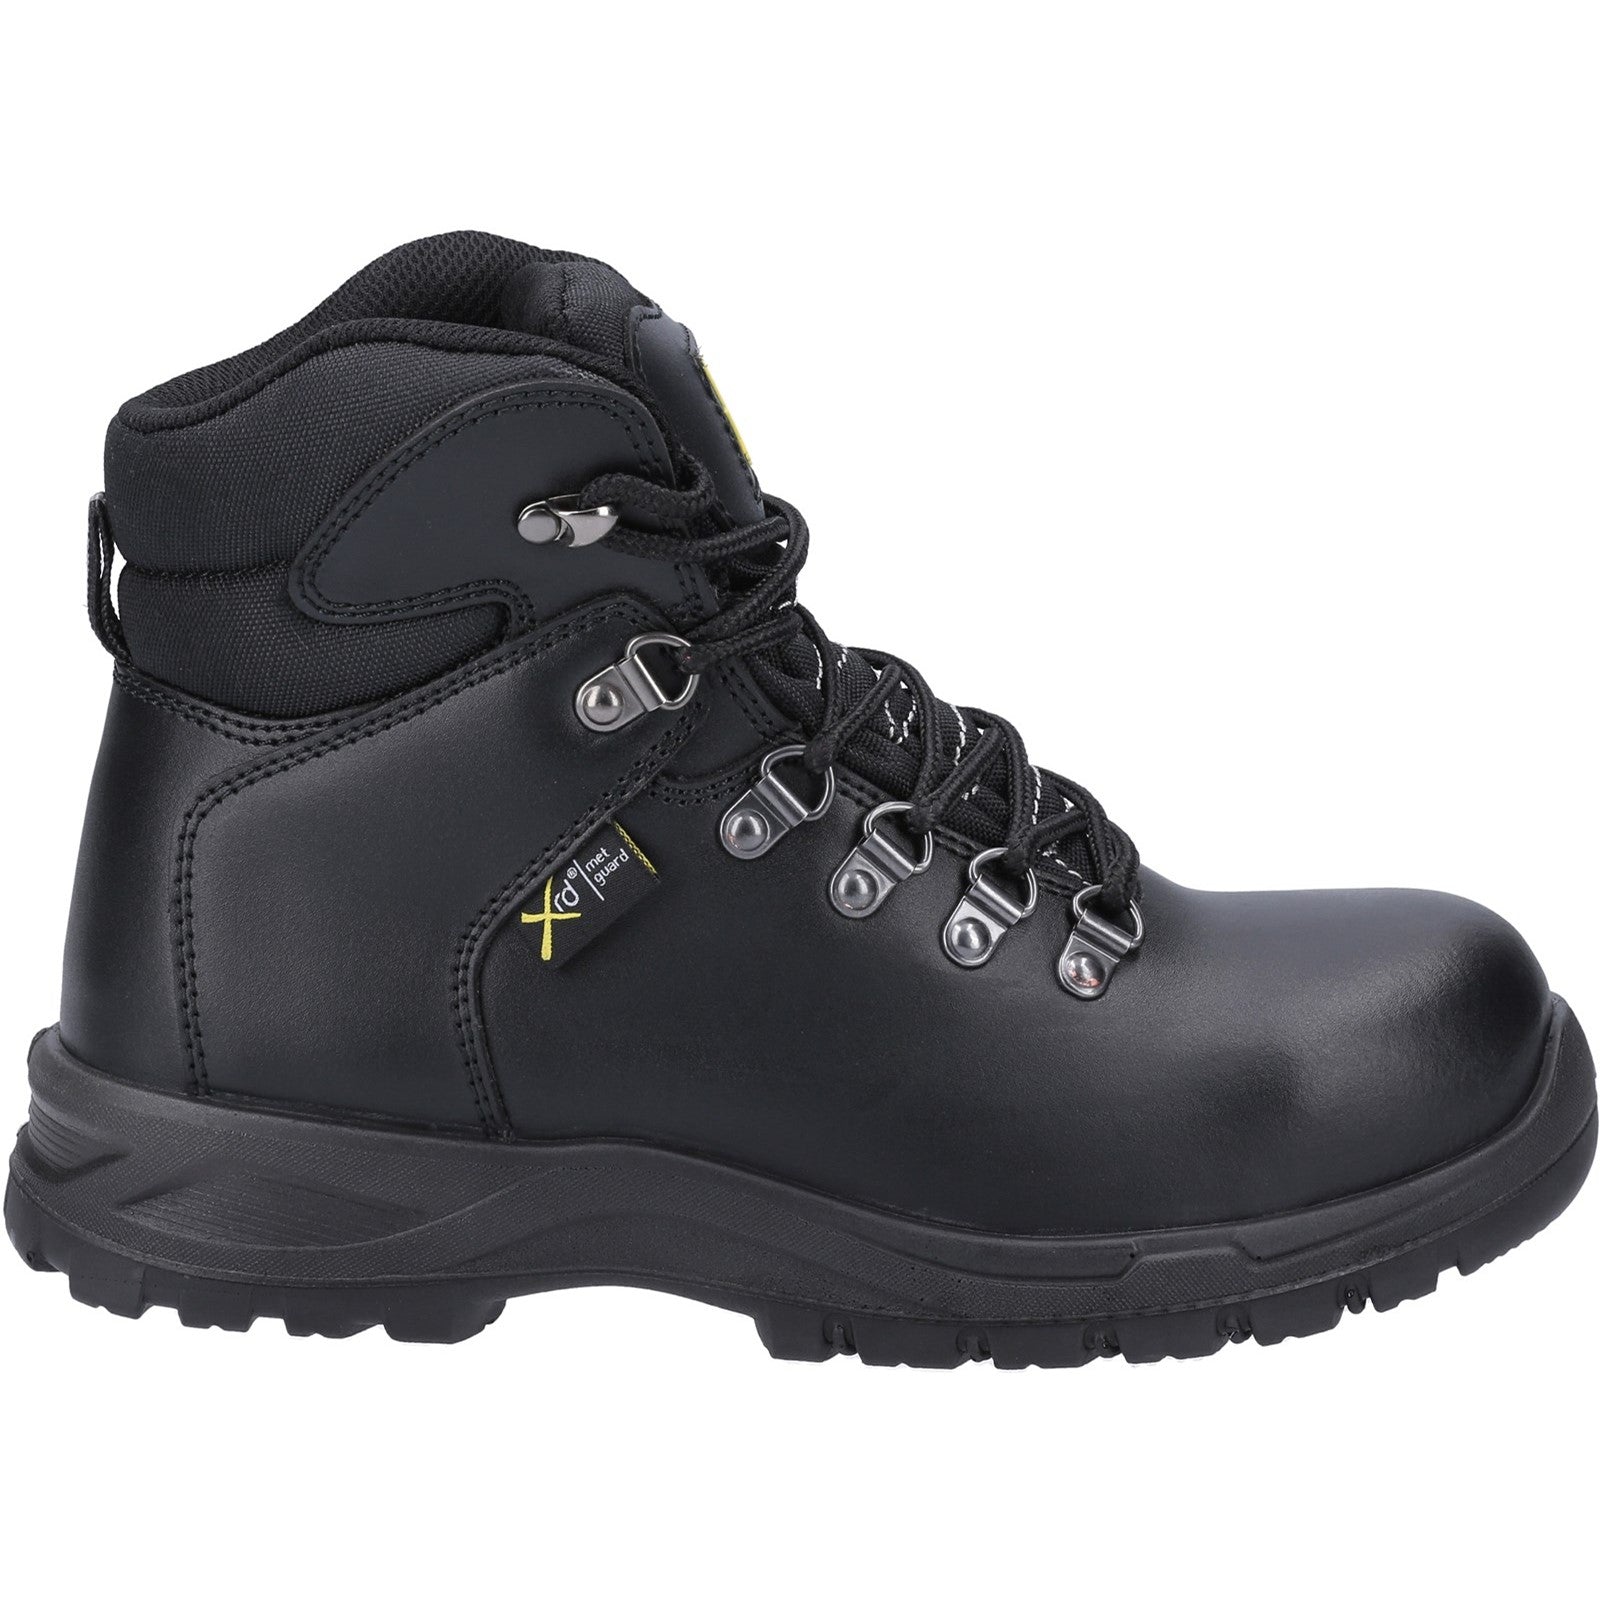 Amblers AS606 Safety Boots